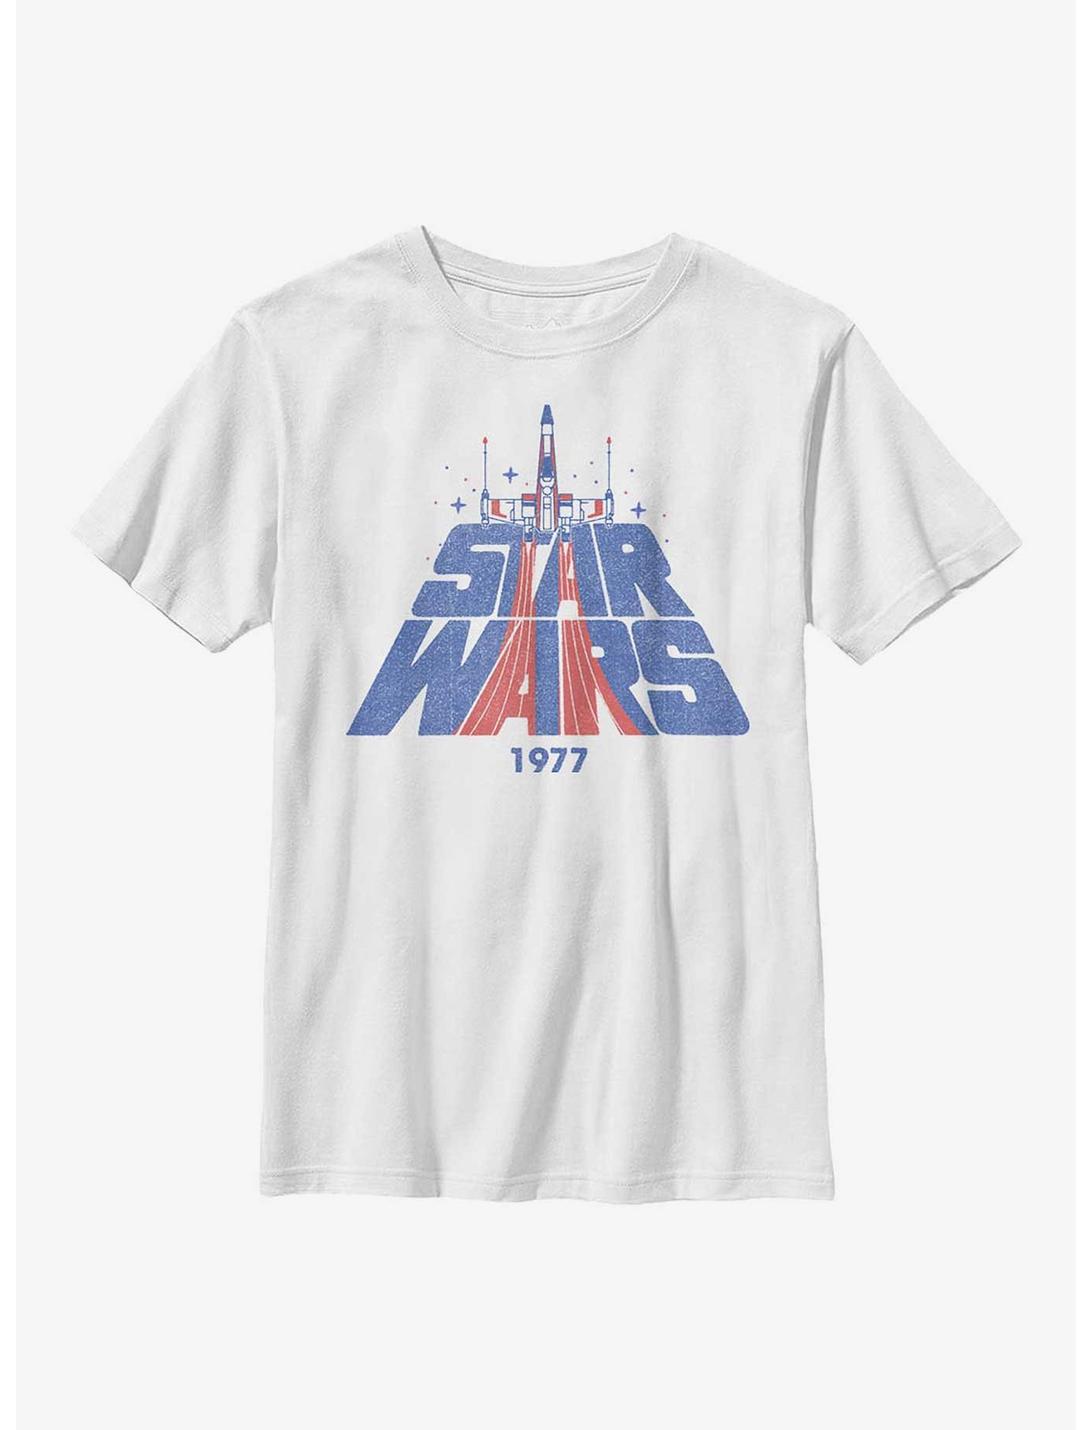 Star Wars Retro X-Wing Youth T-Shirt, WHITE, hi-res